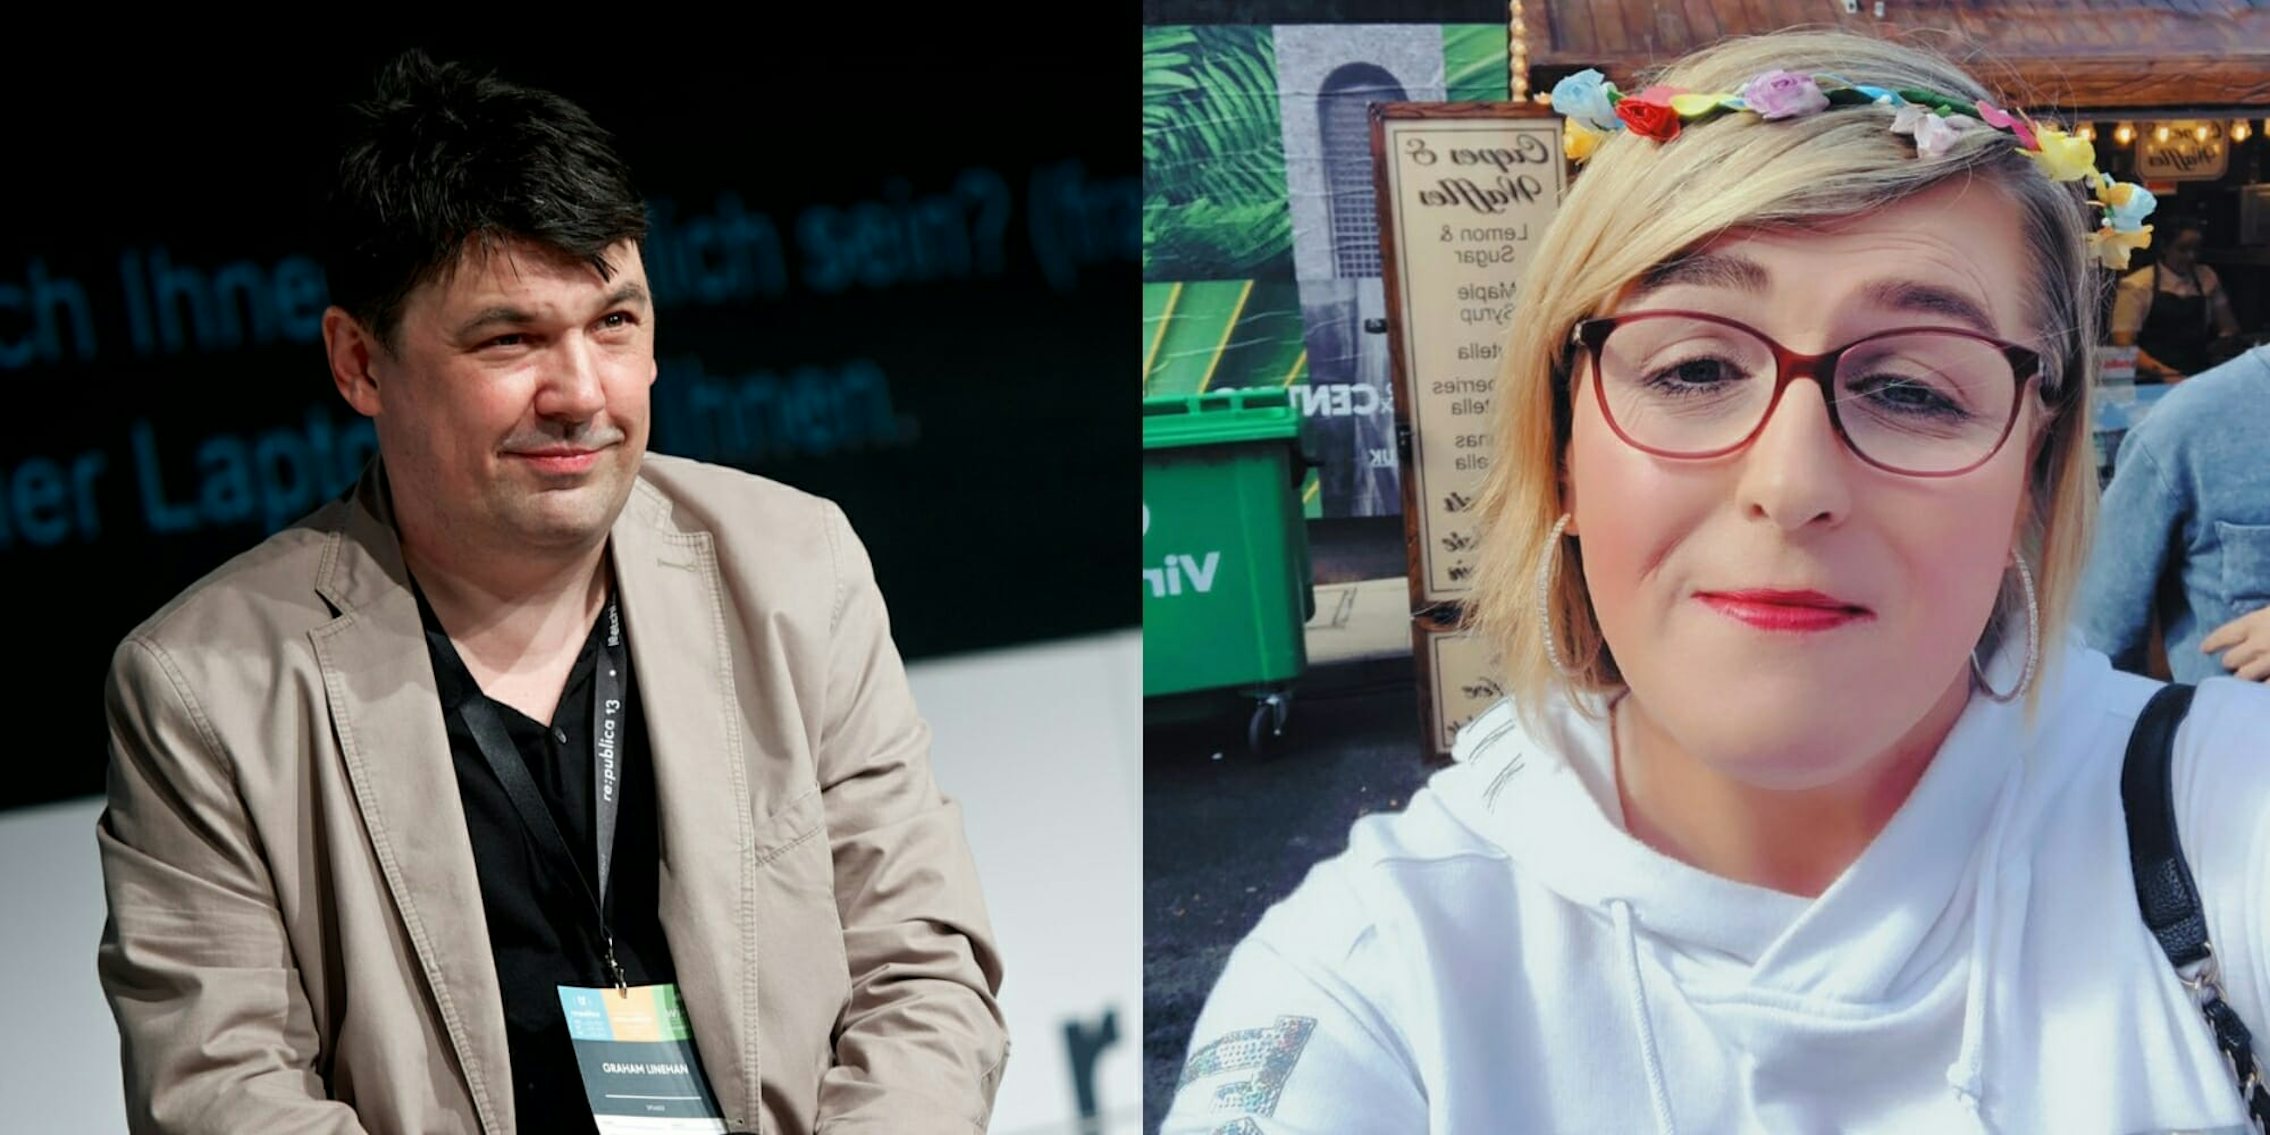 Graham Linehan finds himself in a legal quagmire over his treatment toward Stephanie Hayden.